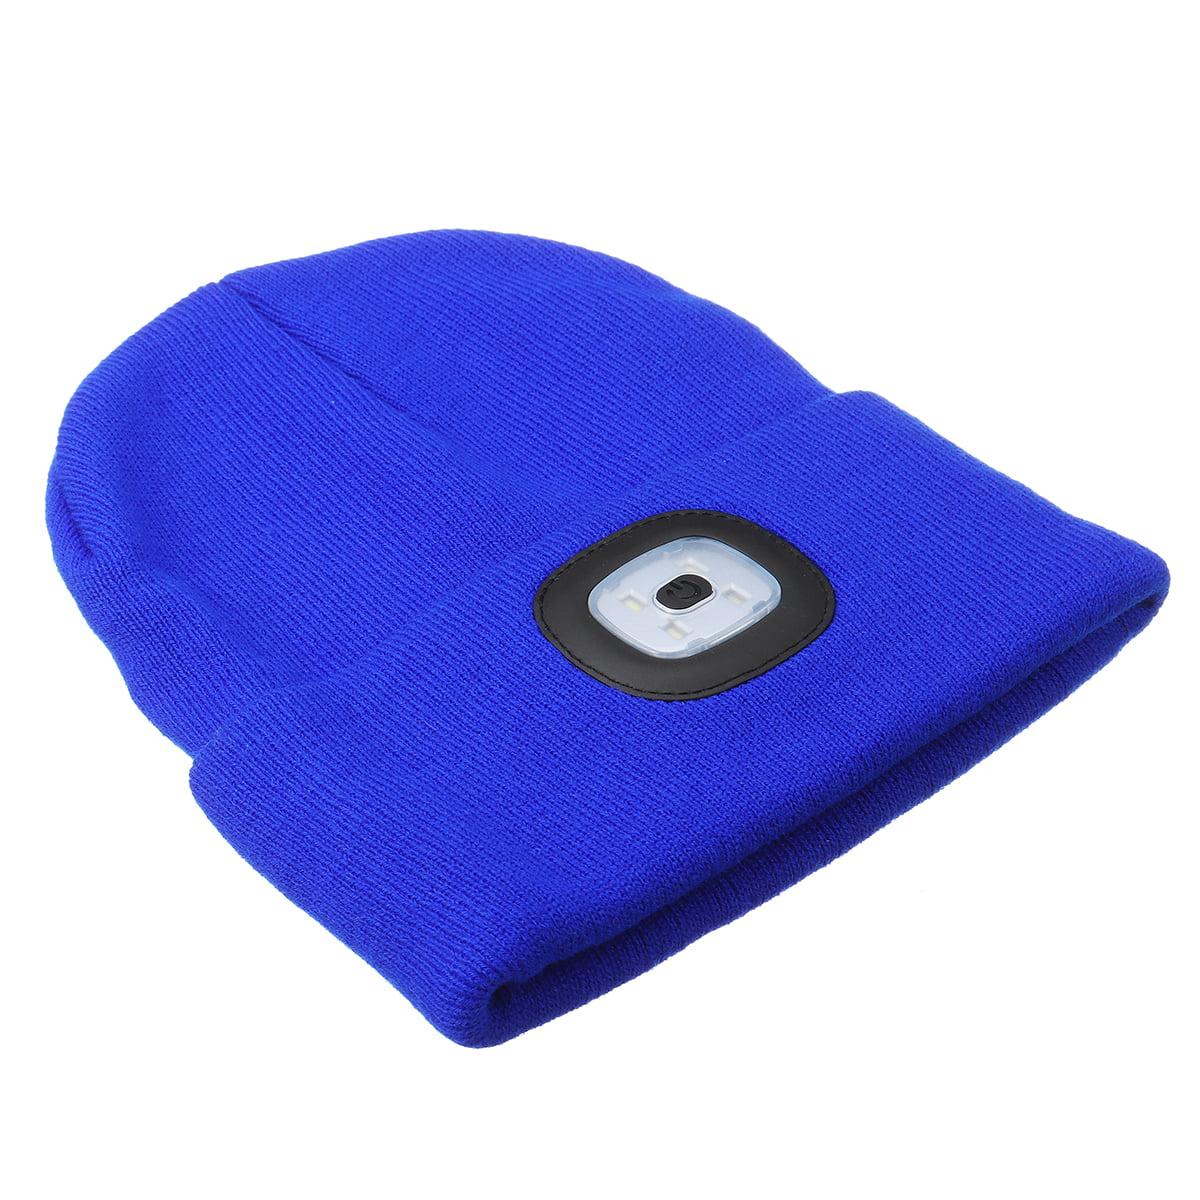 LED Beanie Hat USB Rechargeable Or Battery Unisex High Powered Head Lamp Light 